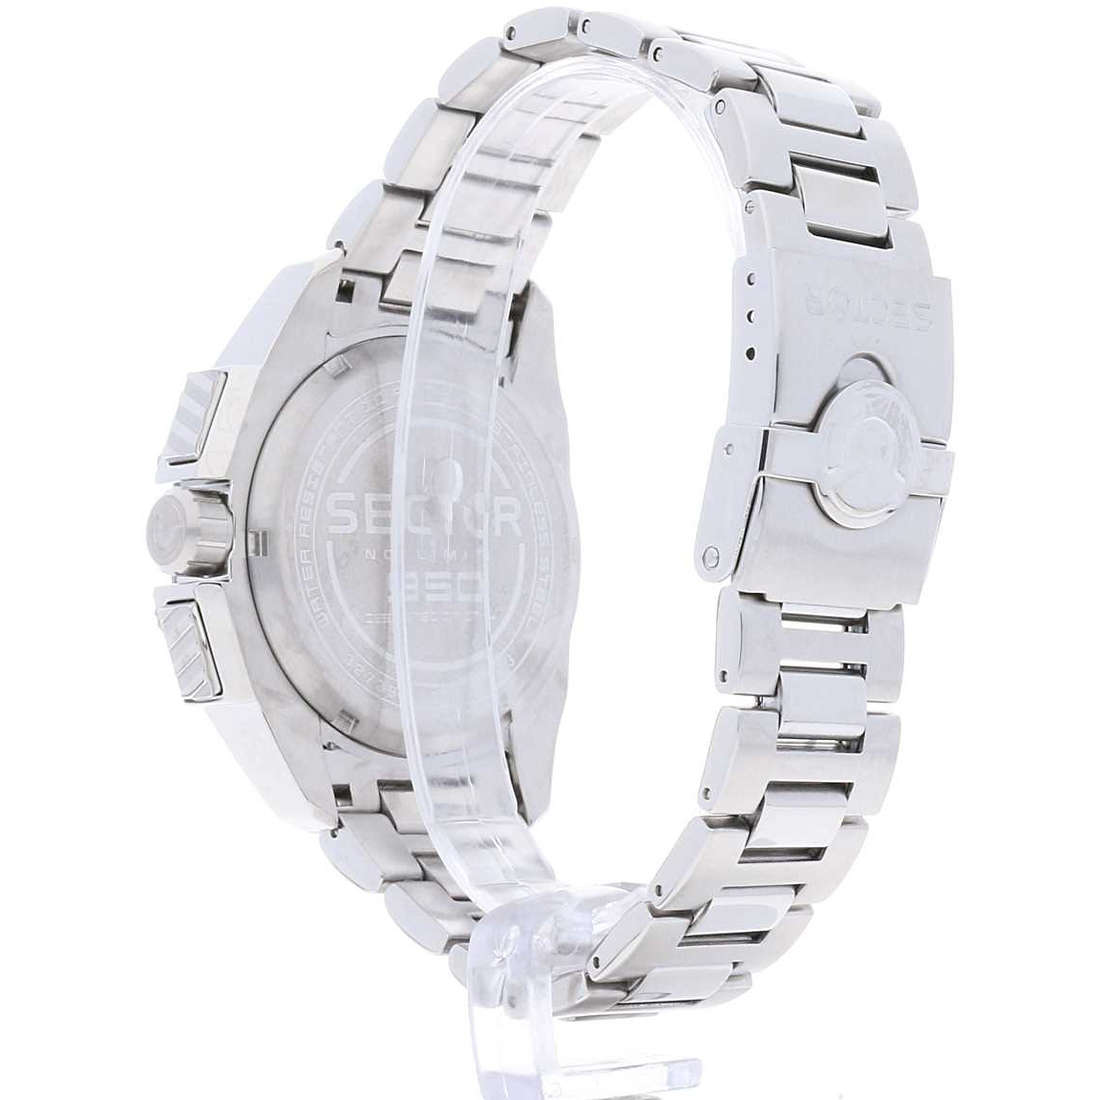 Offres montres homme Sector R3273981001